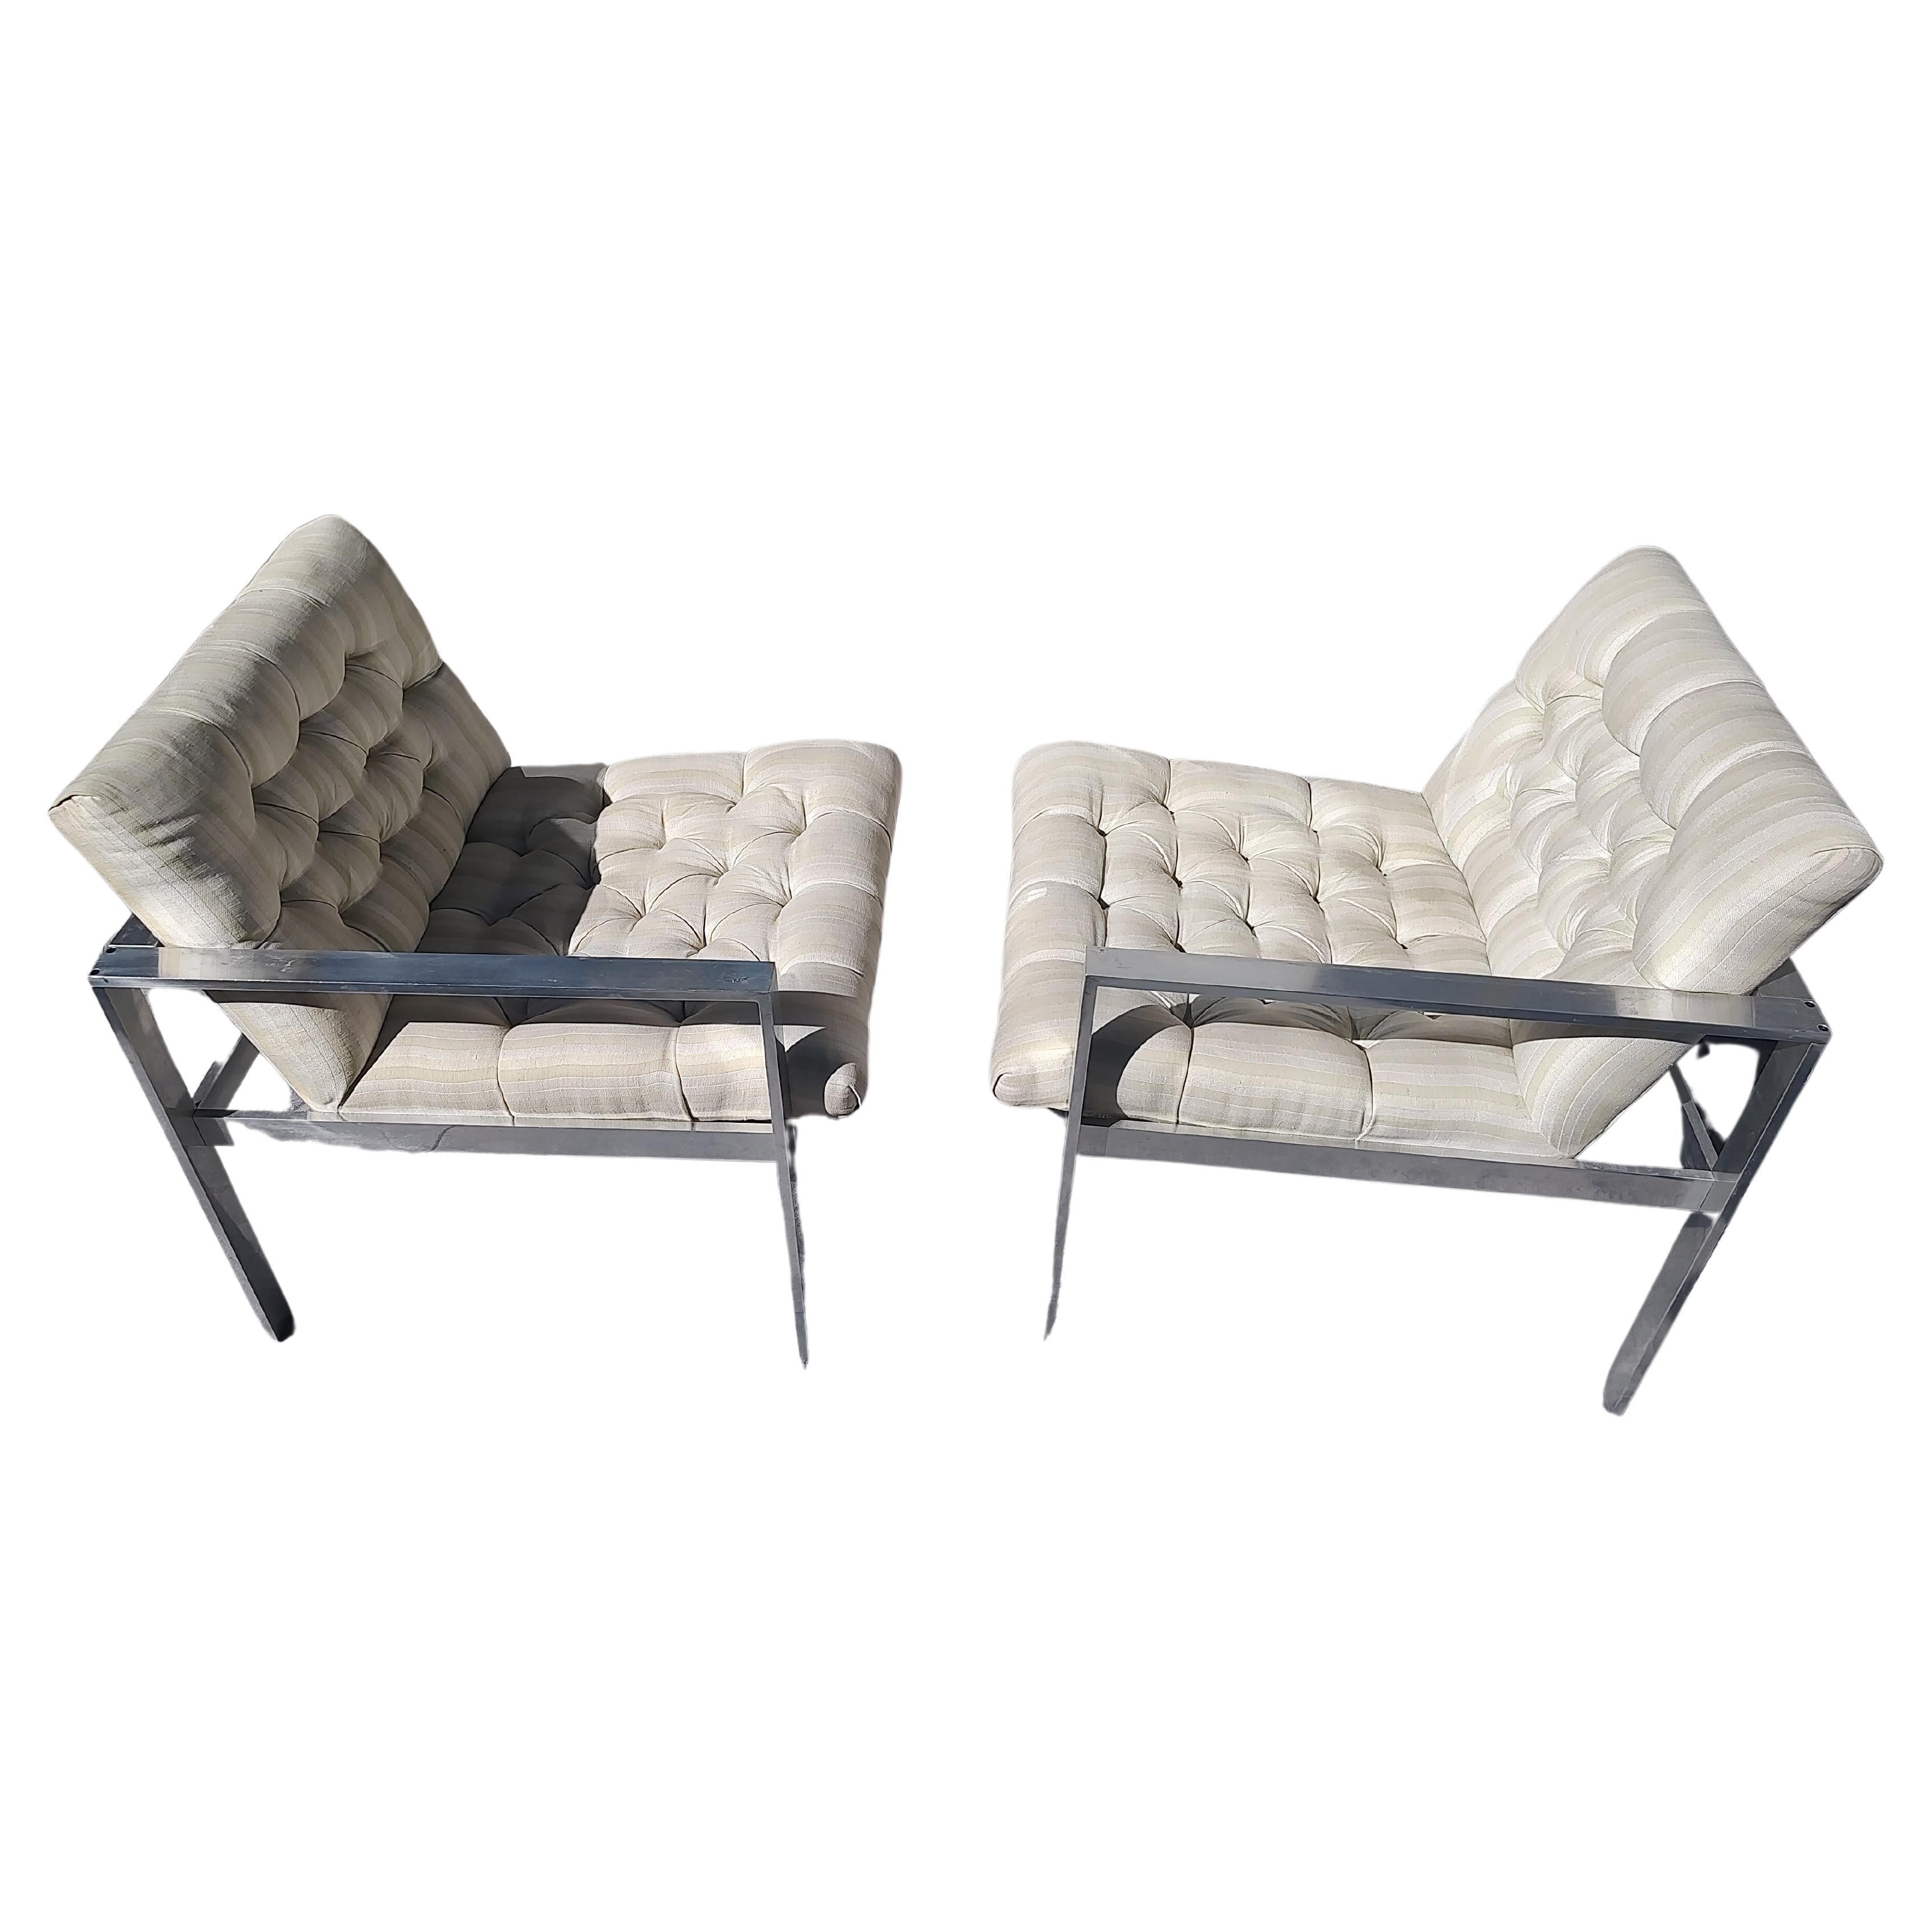 Pair of Mid-Century Modern Tufted Aluminum Lounge Chairs by Harvey Probber For Sale 1